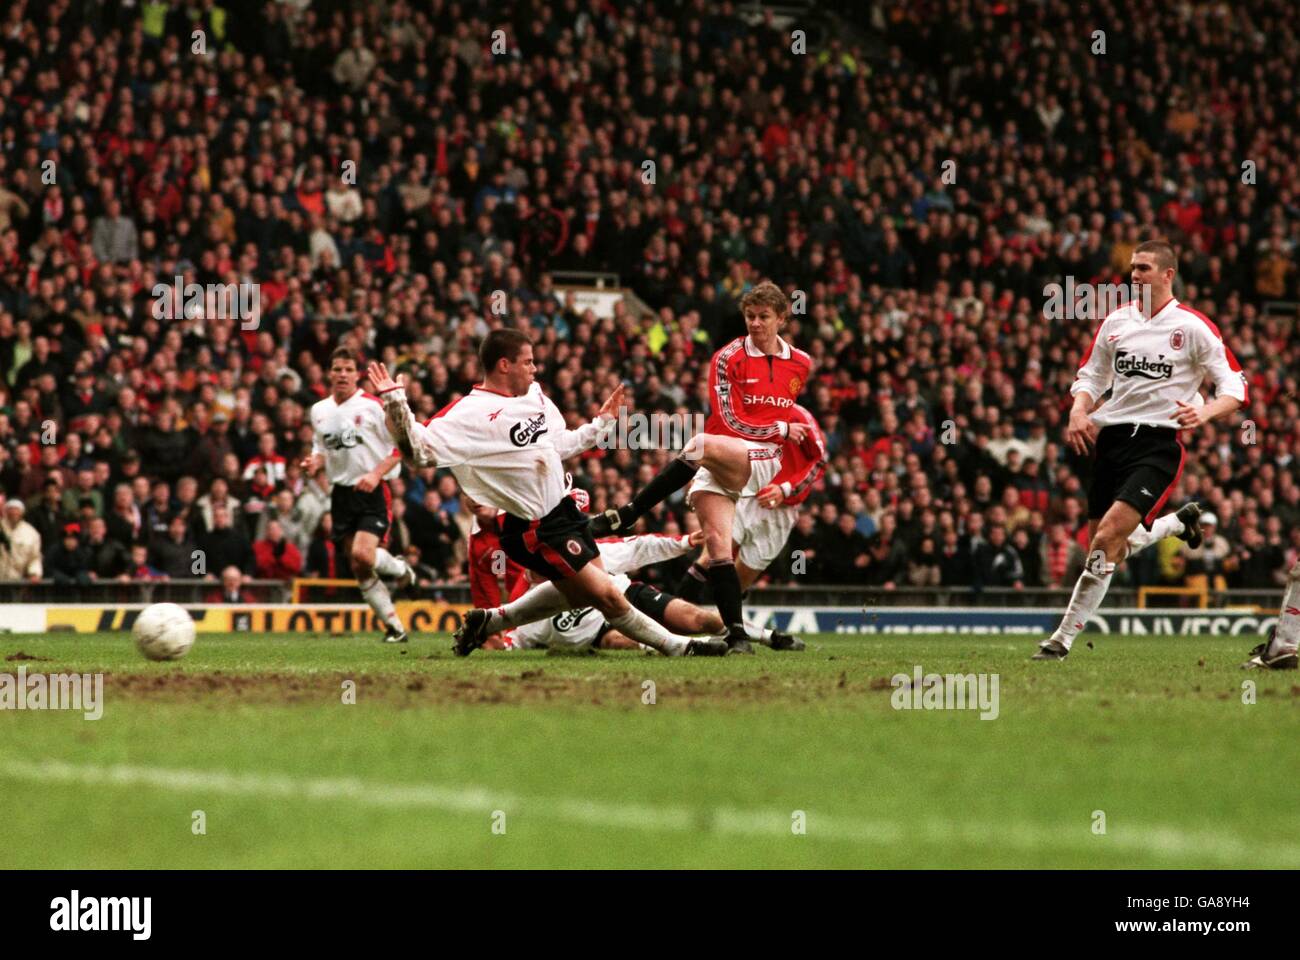 Manchester United's Ole Gunner Solskjaer's (centre) avoids Jamie Carragher to score their winning goal ... Soccer - AXA FA Cup - Fourth Round - Manchester United v Liverpool ... 24-01-1999 ... ... ... Photo Credit should read: Michael Steele/EMPICS Sport/PA Photos. Unique Reference No. 302407 ... Soccer - Euro 2000 Qualifier - Group 5 - England v Bulgaria a dejected Alan Shearer after England could only manage a goalless draw Stock Photo